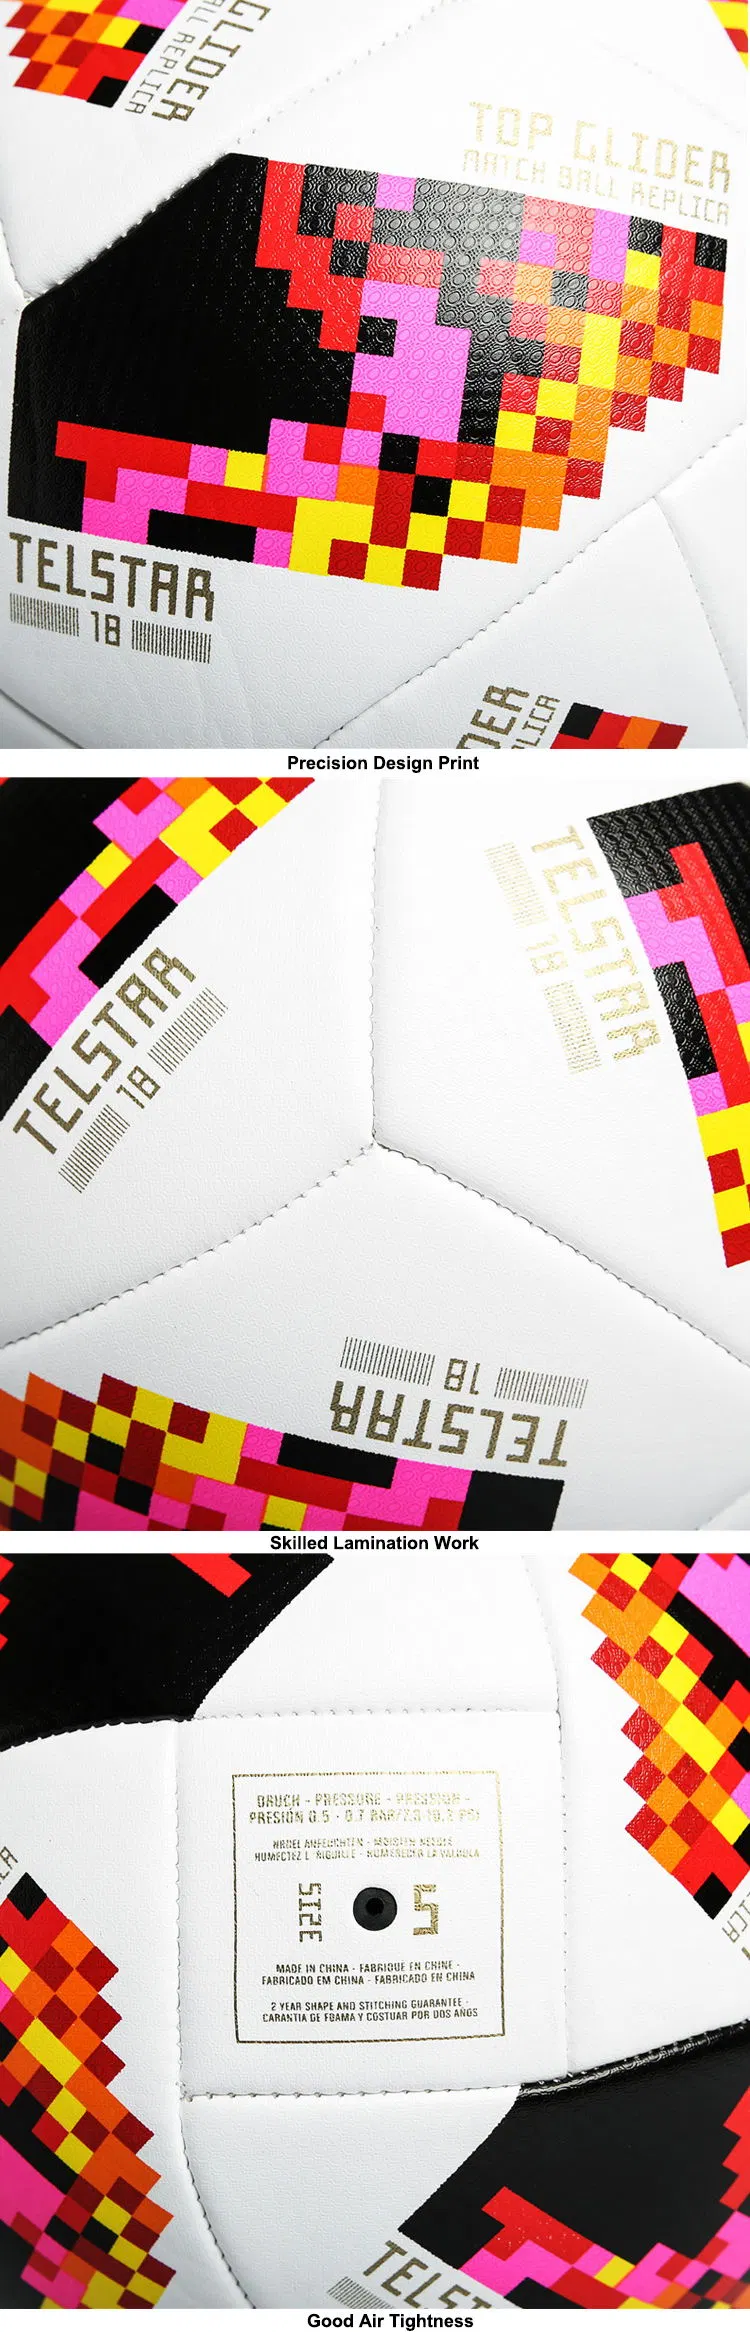 New Design Custom Official Size World Cup Football